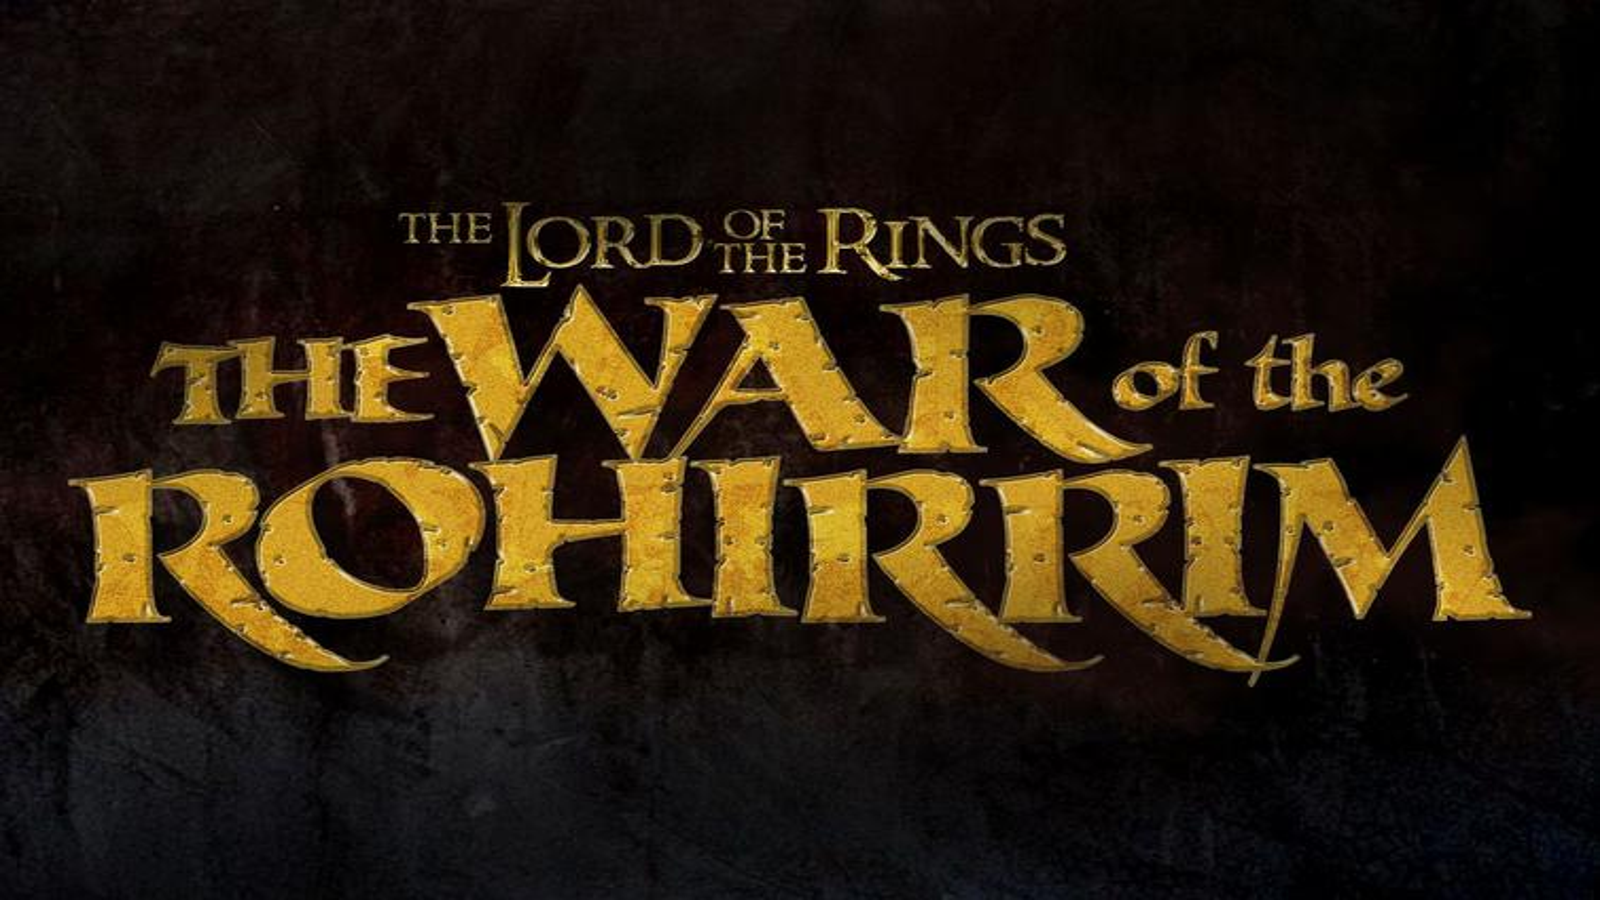 The Lord of the Rings: The Fellowship of the Ring, Trailer, Netflix, film  trailer, The Lord of the Rings: The Fellowship of the Ring